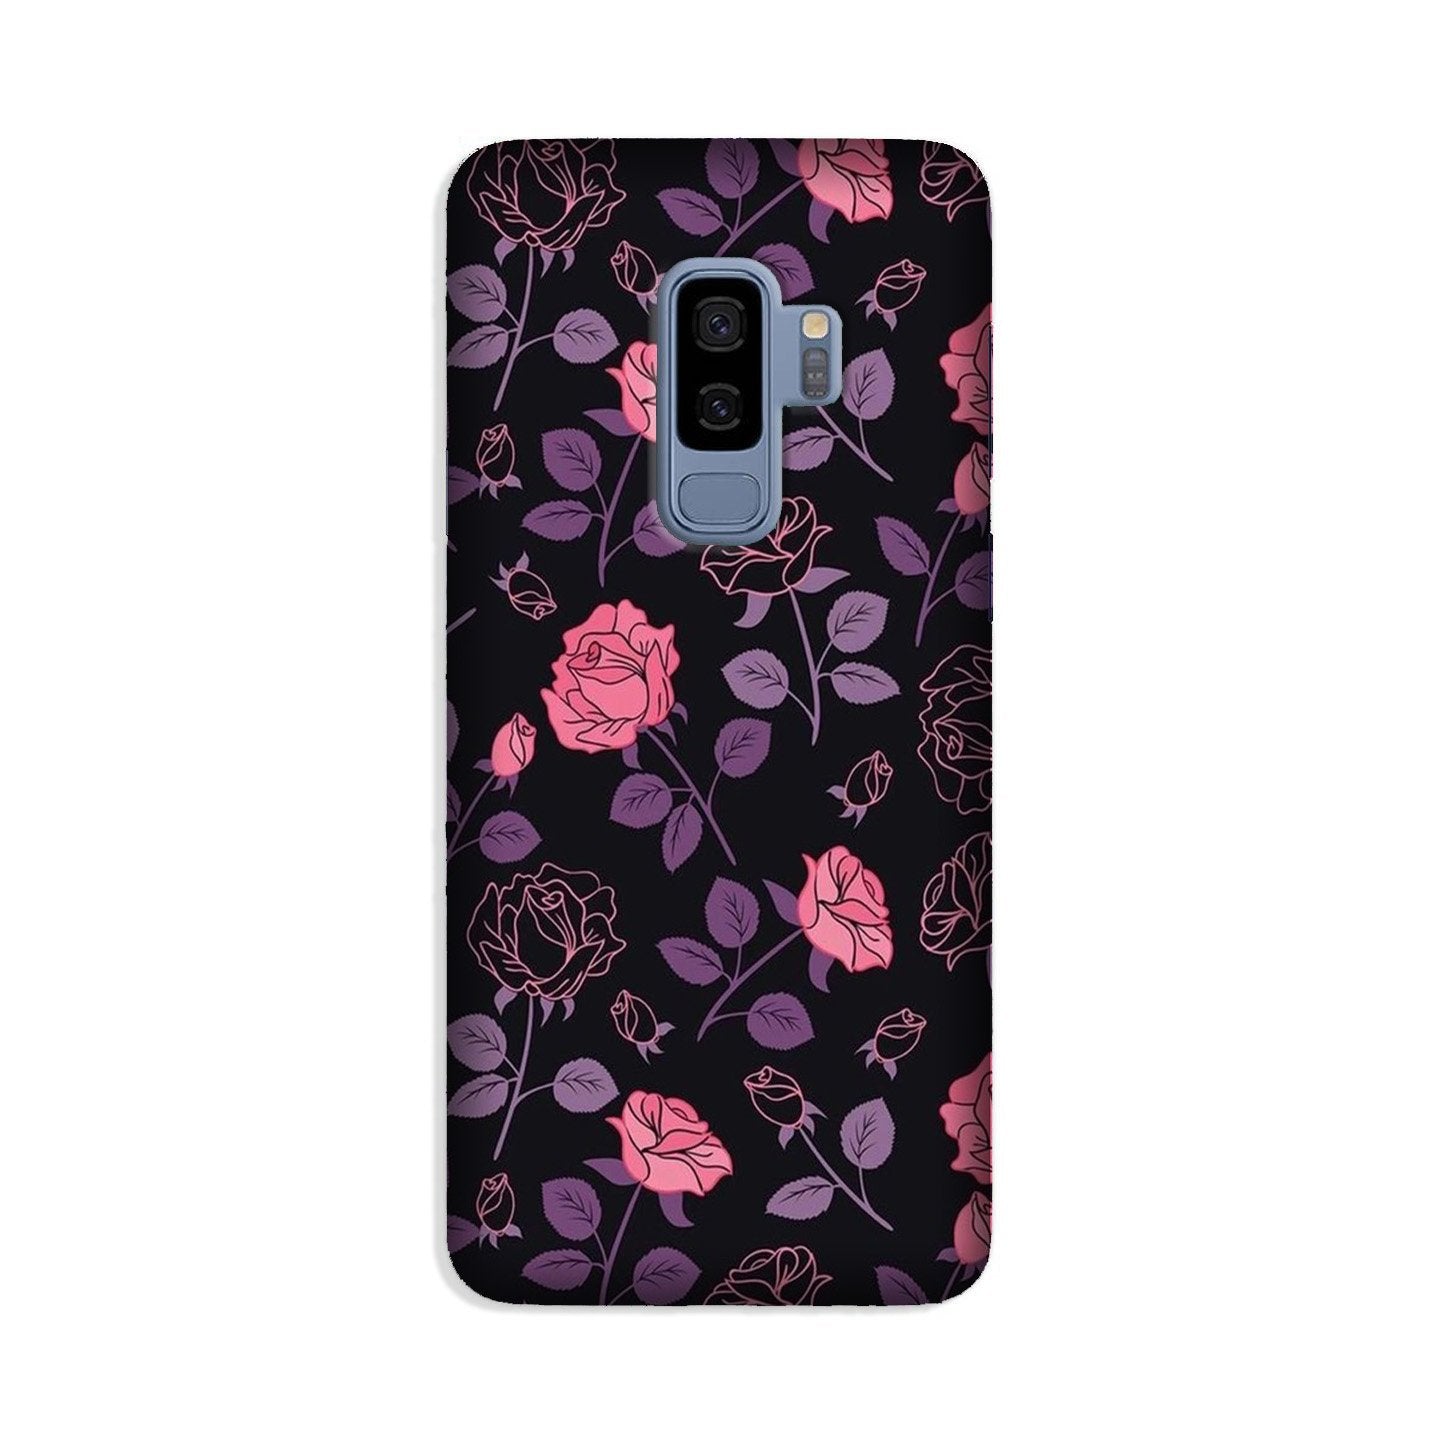 Rose Pattern Case for Galaxy S9 Plus